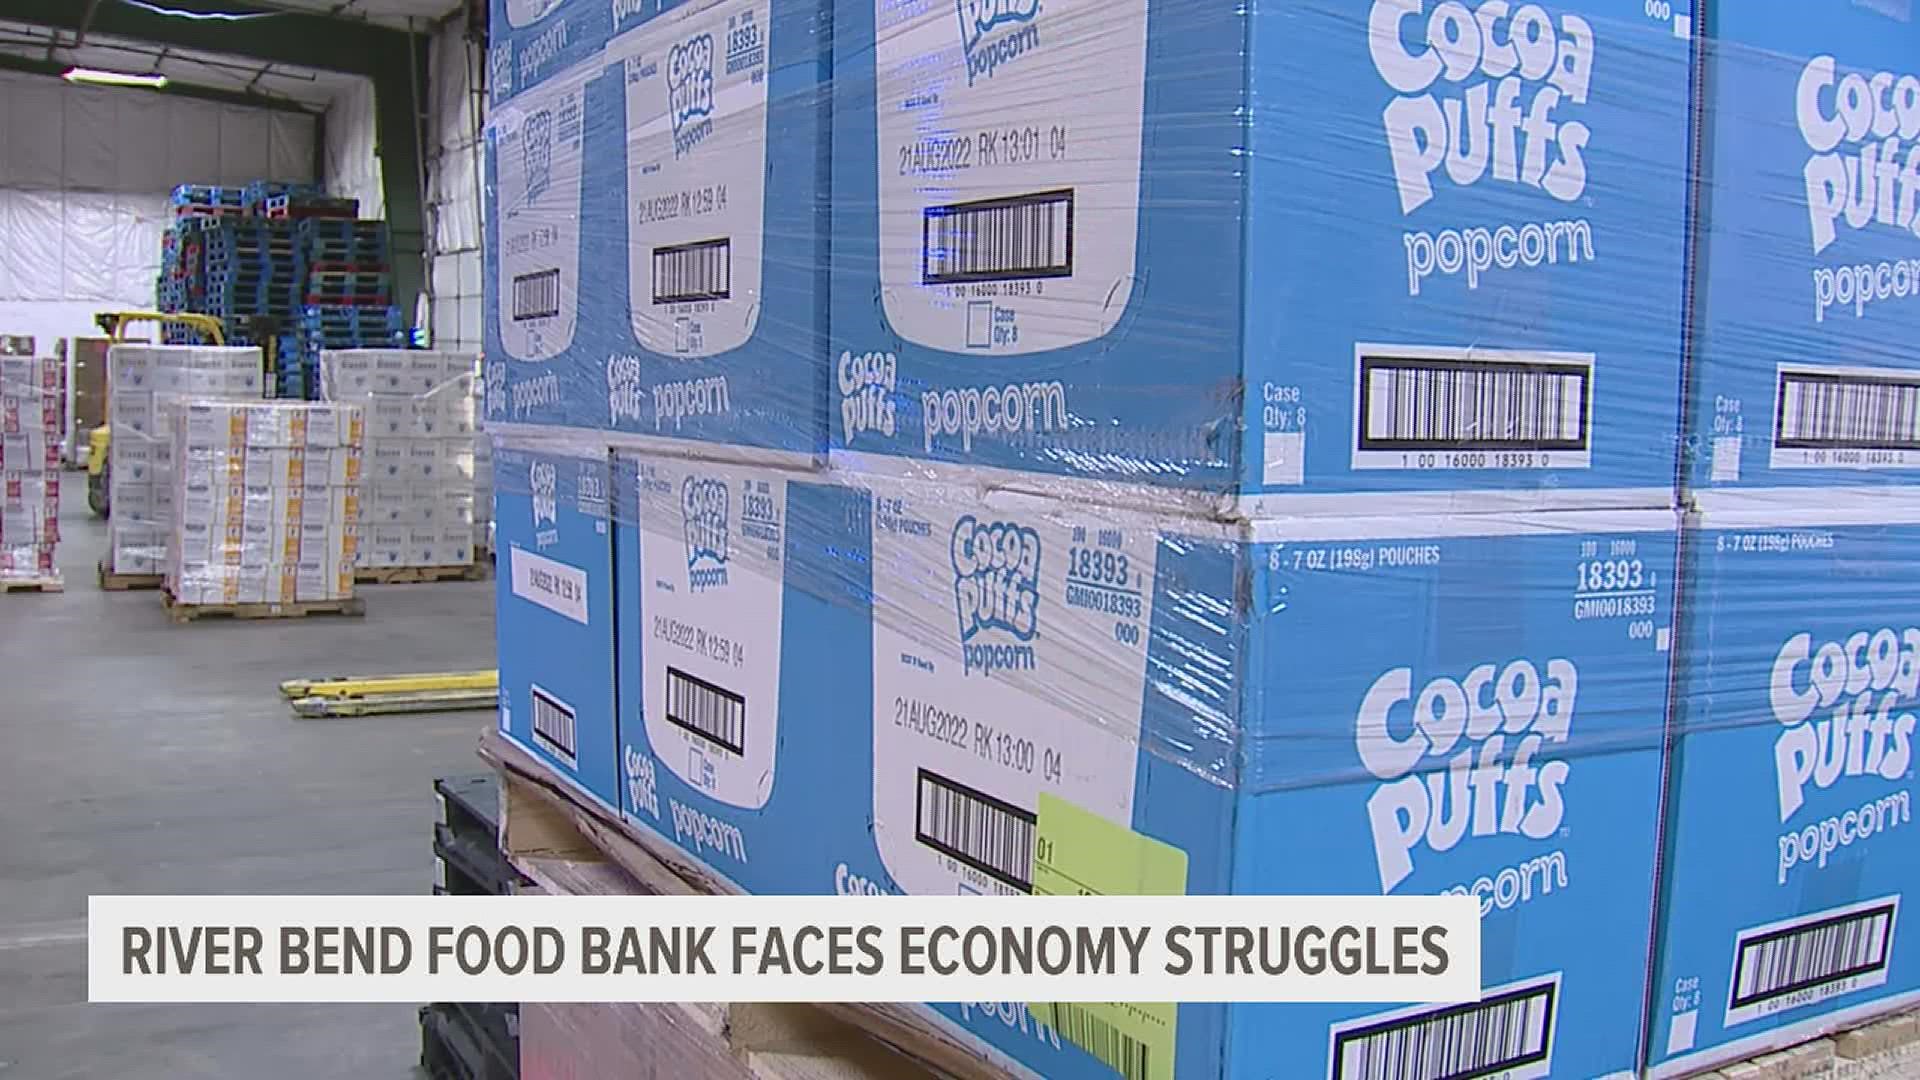 Staff says there's been a 60% increase of families in need at River Bend Food Bank pantries in the past few months.